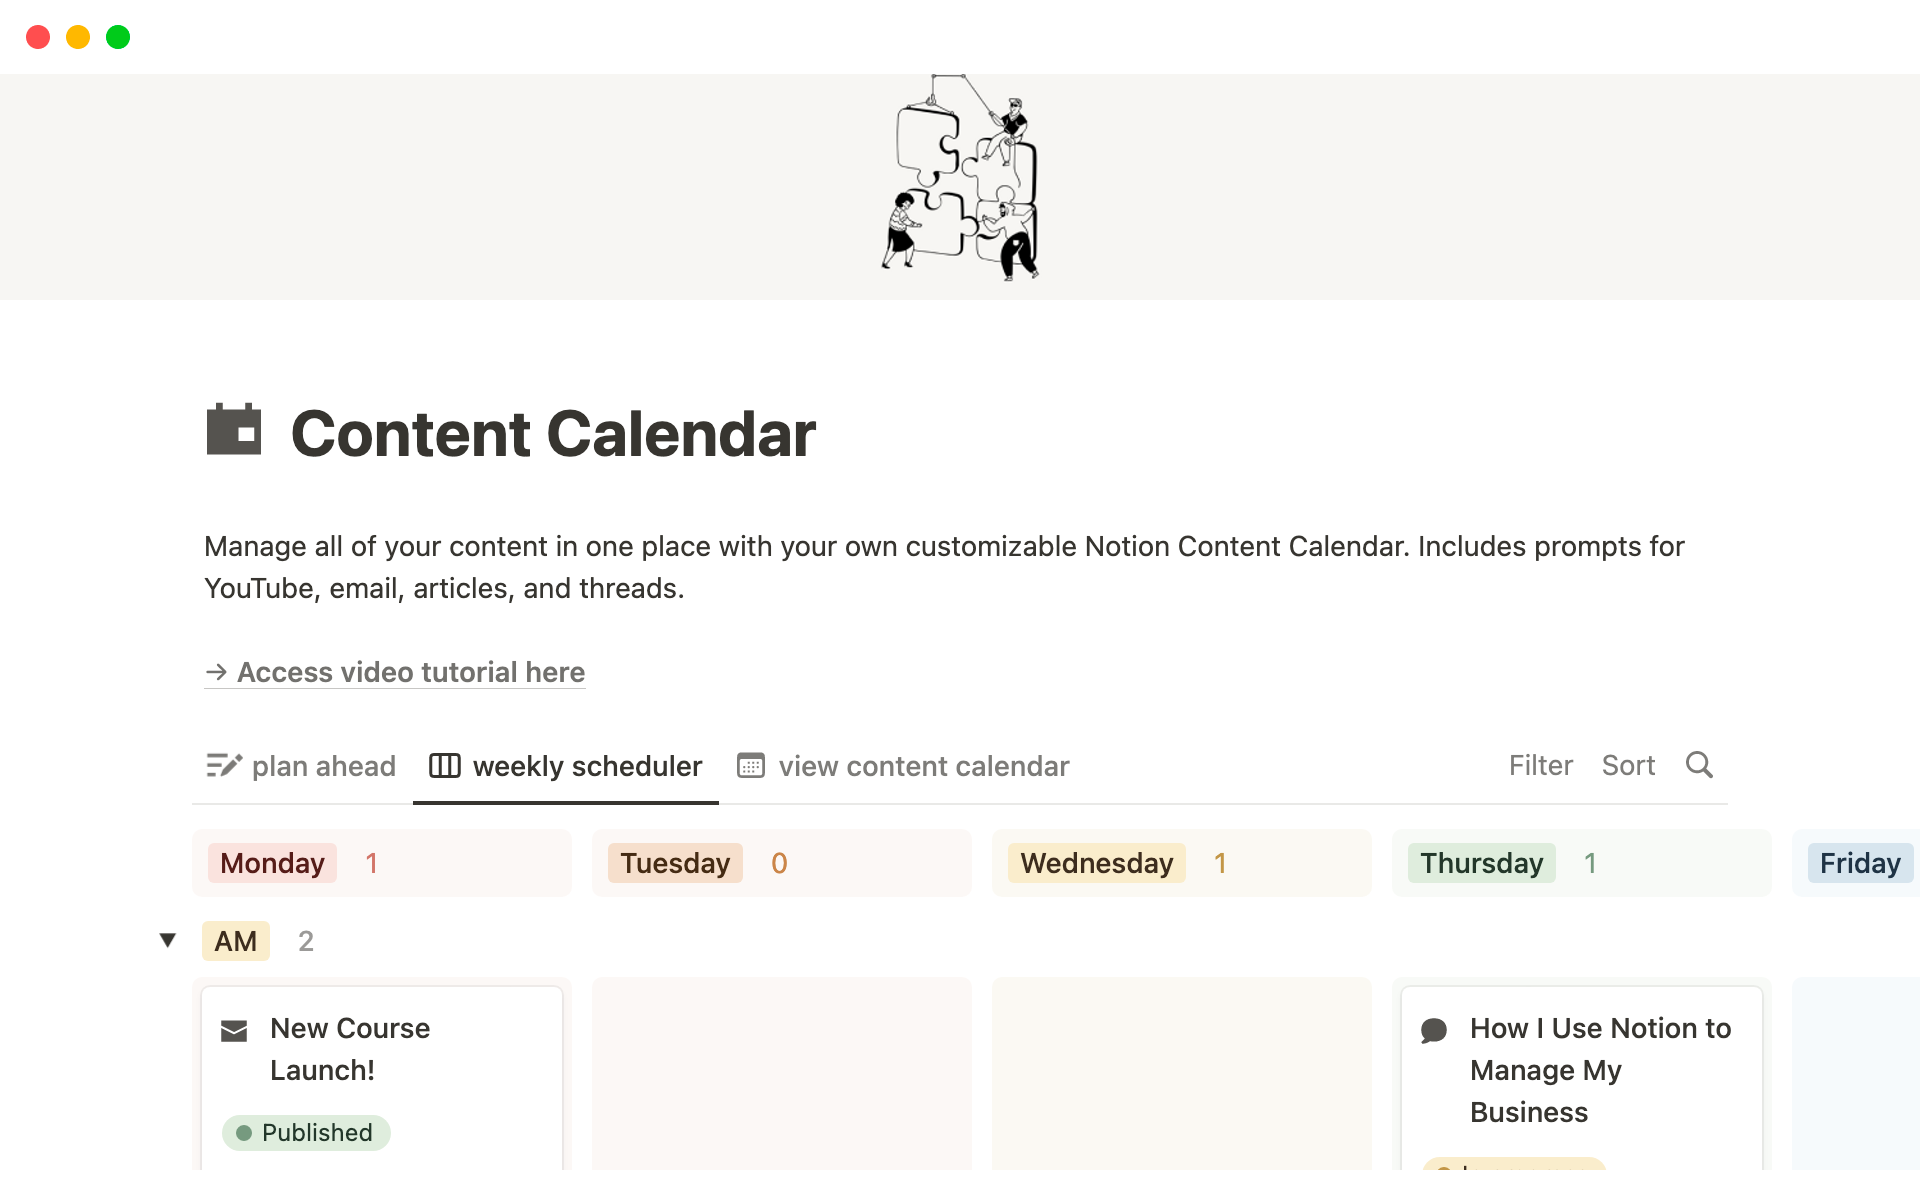 Manage all of your content in one place with your own customizable Notion Content Calendar.